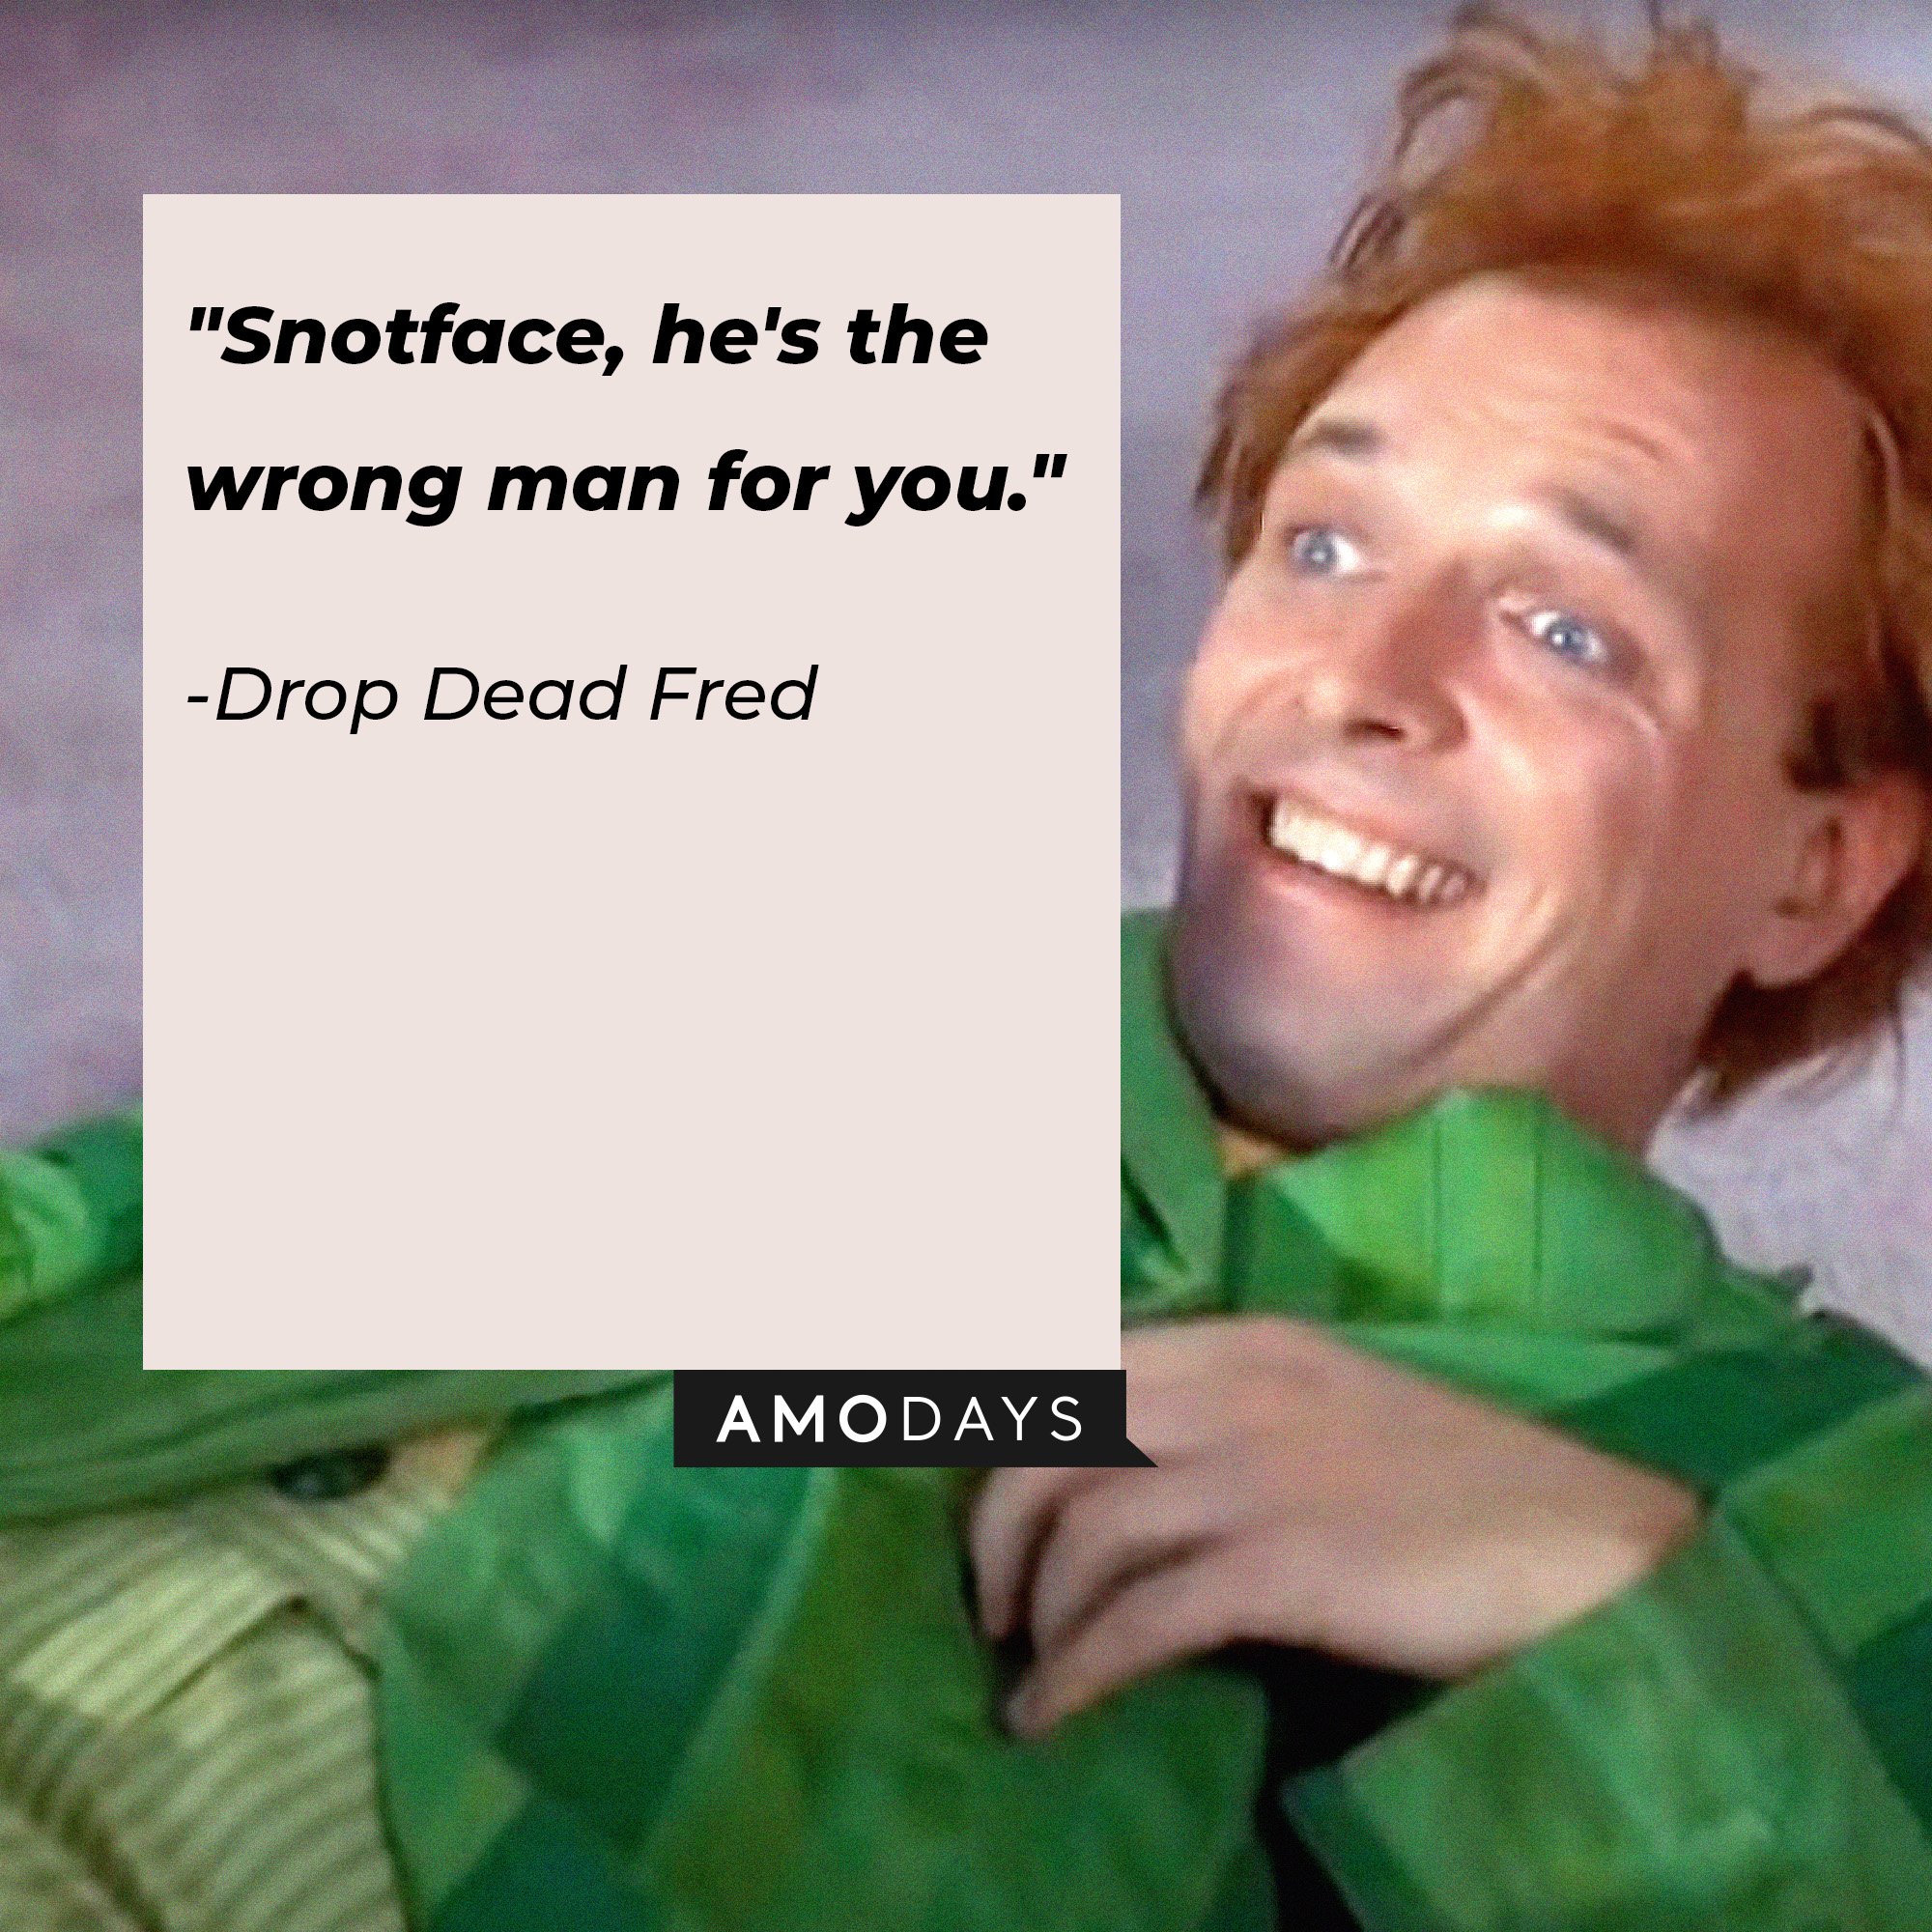 Drop Dead Fred's quote: "Snotface, he's the wrong man for you."  | Image: AmoDays